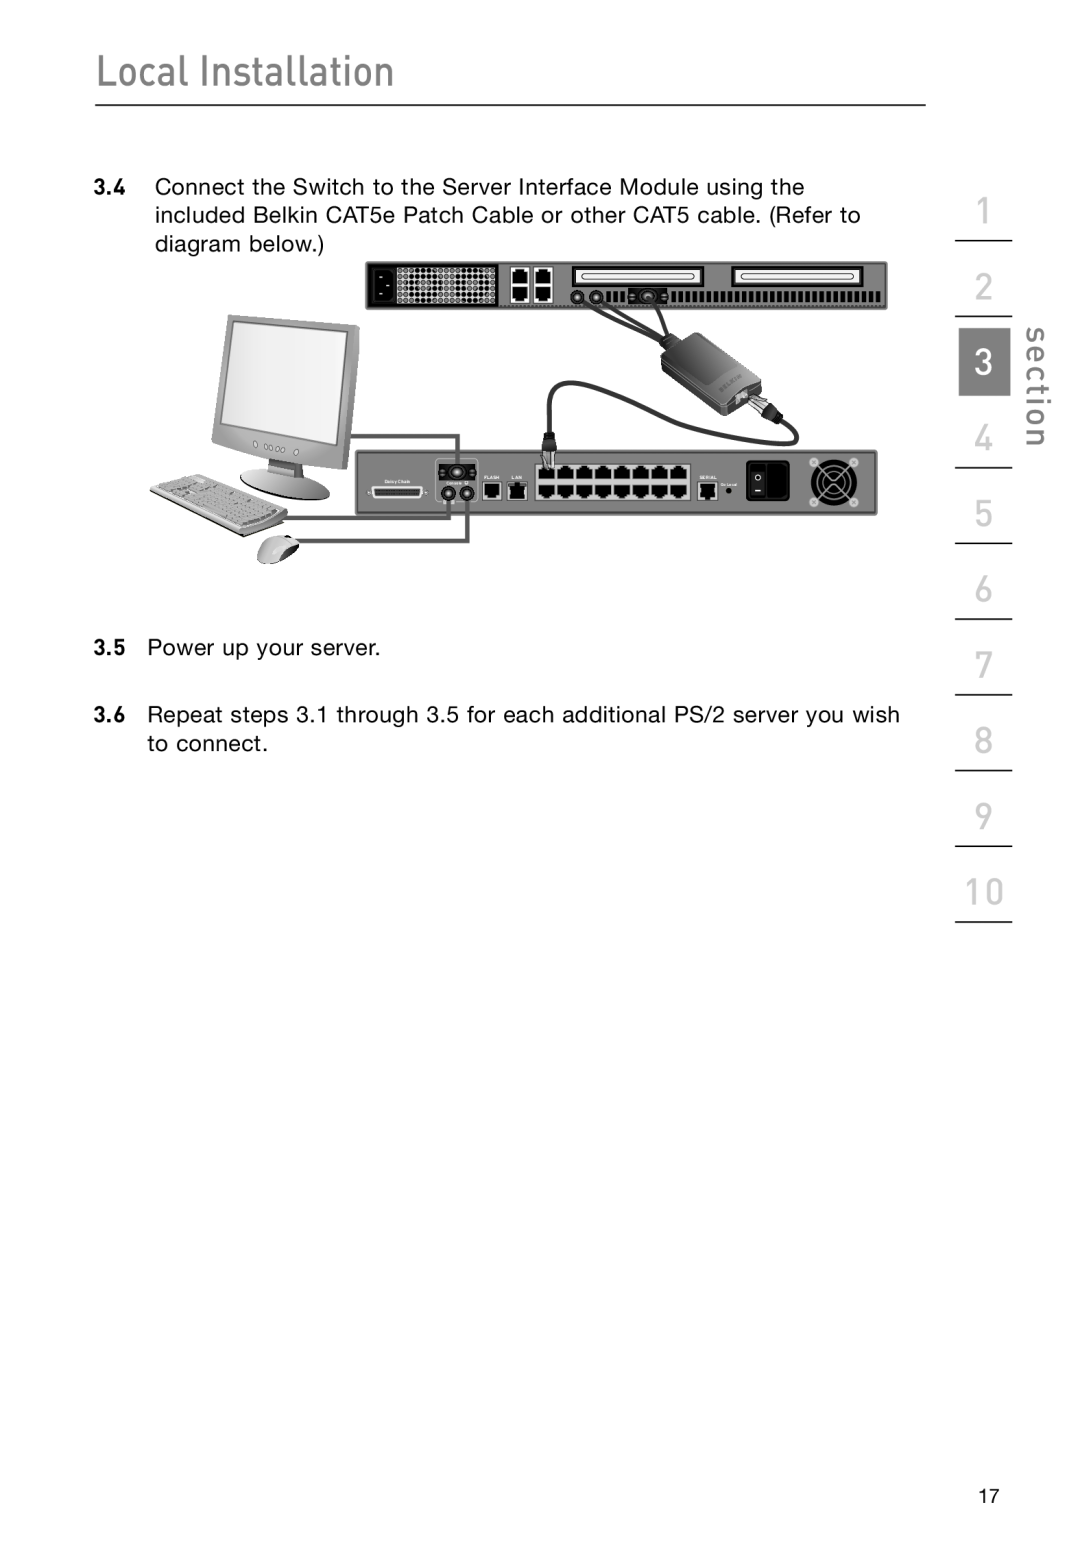 Belkin F1DP108G user manual Local Installation, section, Power up your server 